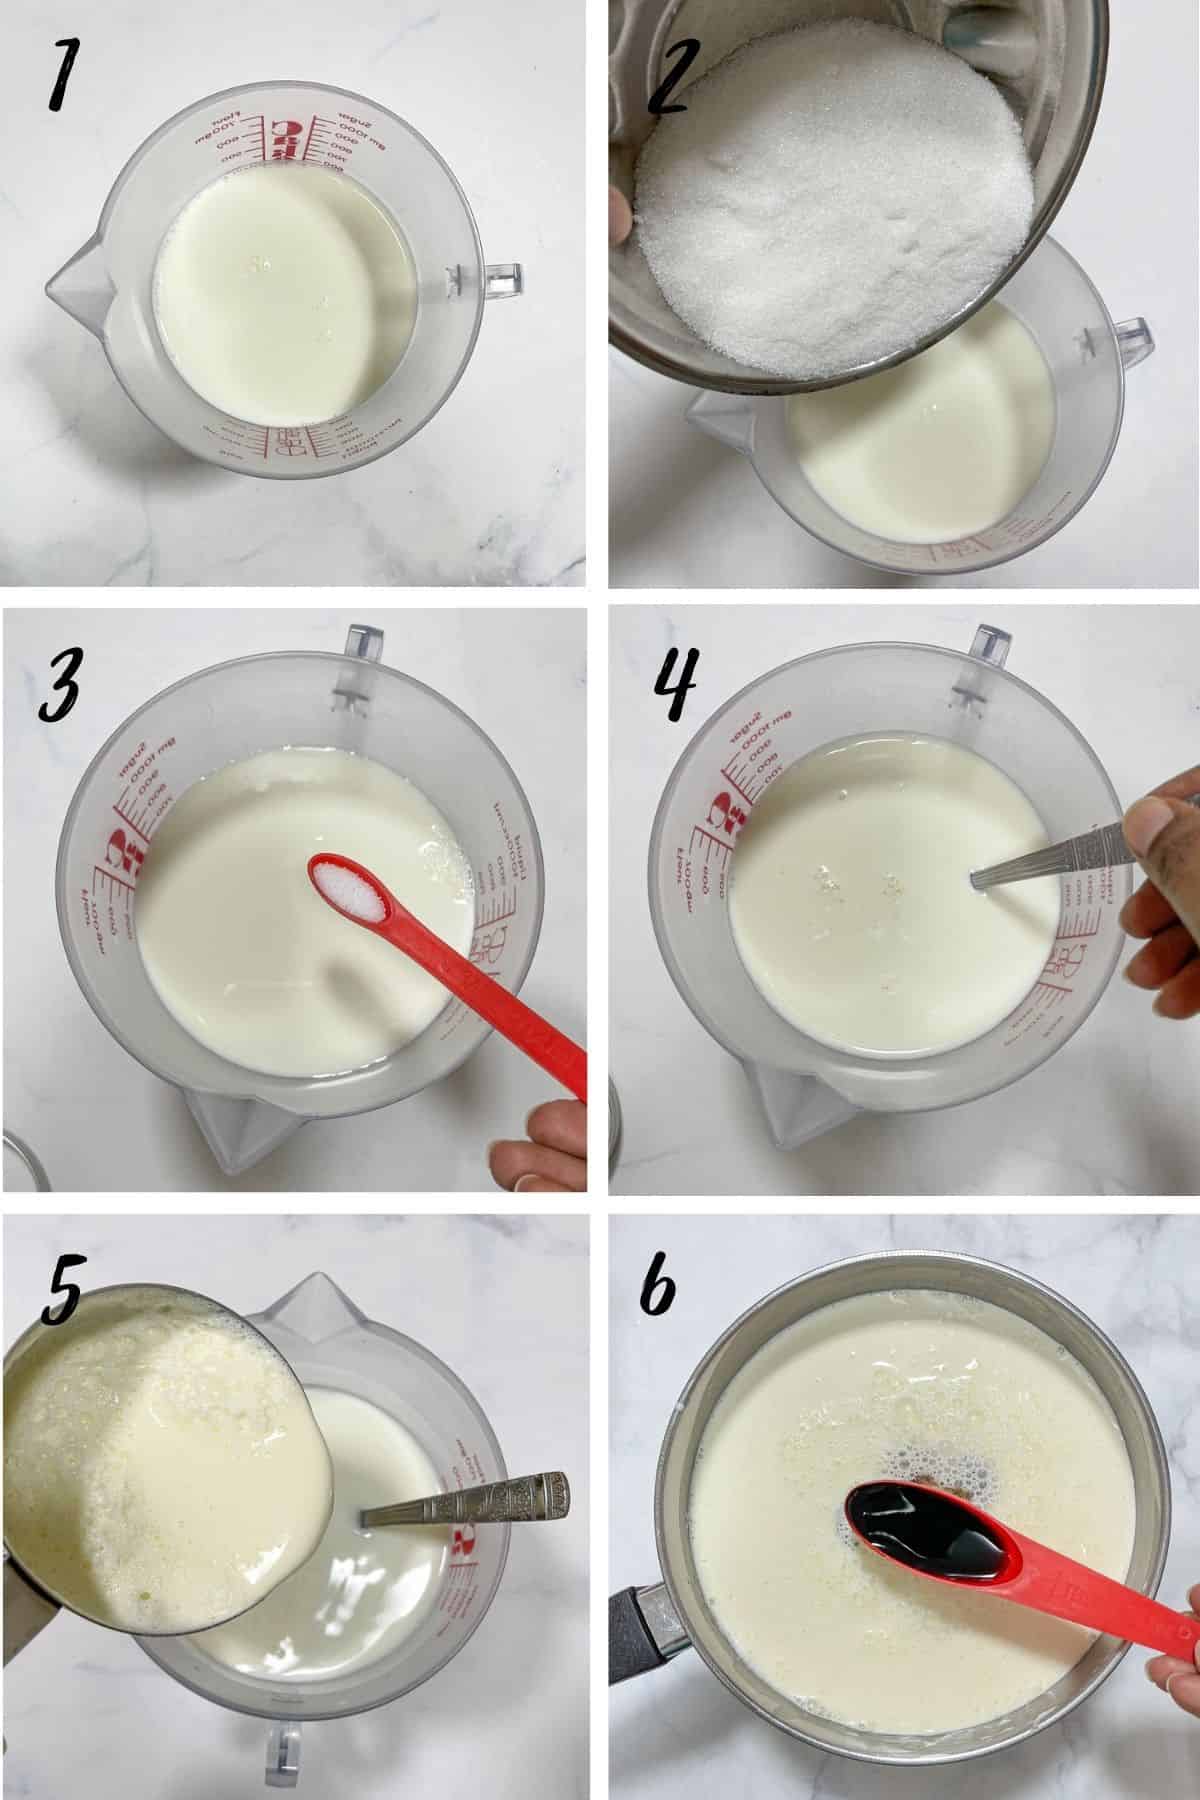 A poster of 6 images showing how to mix ice cream solution for ice cream maker